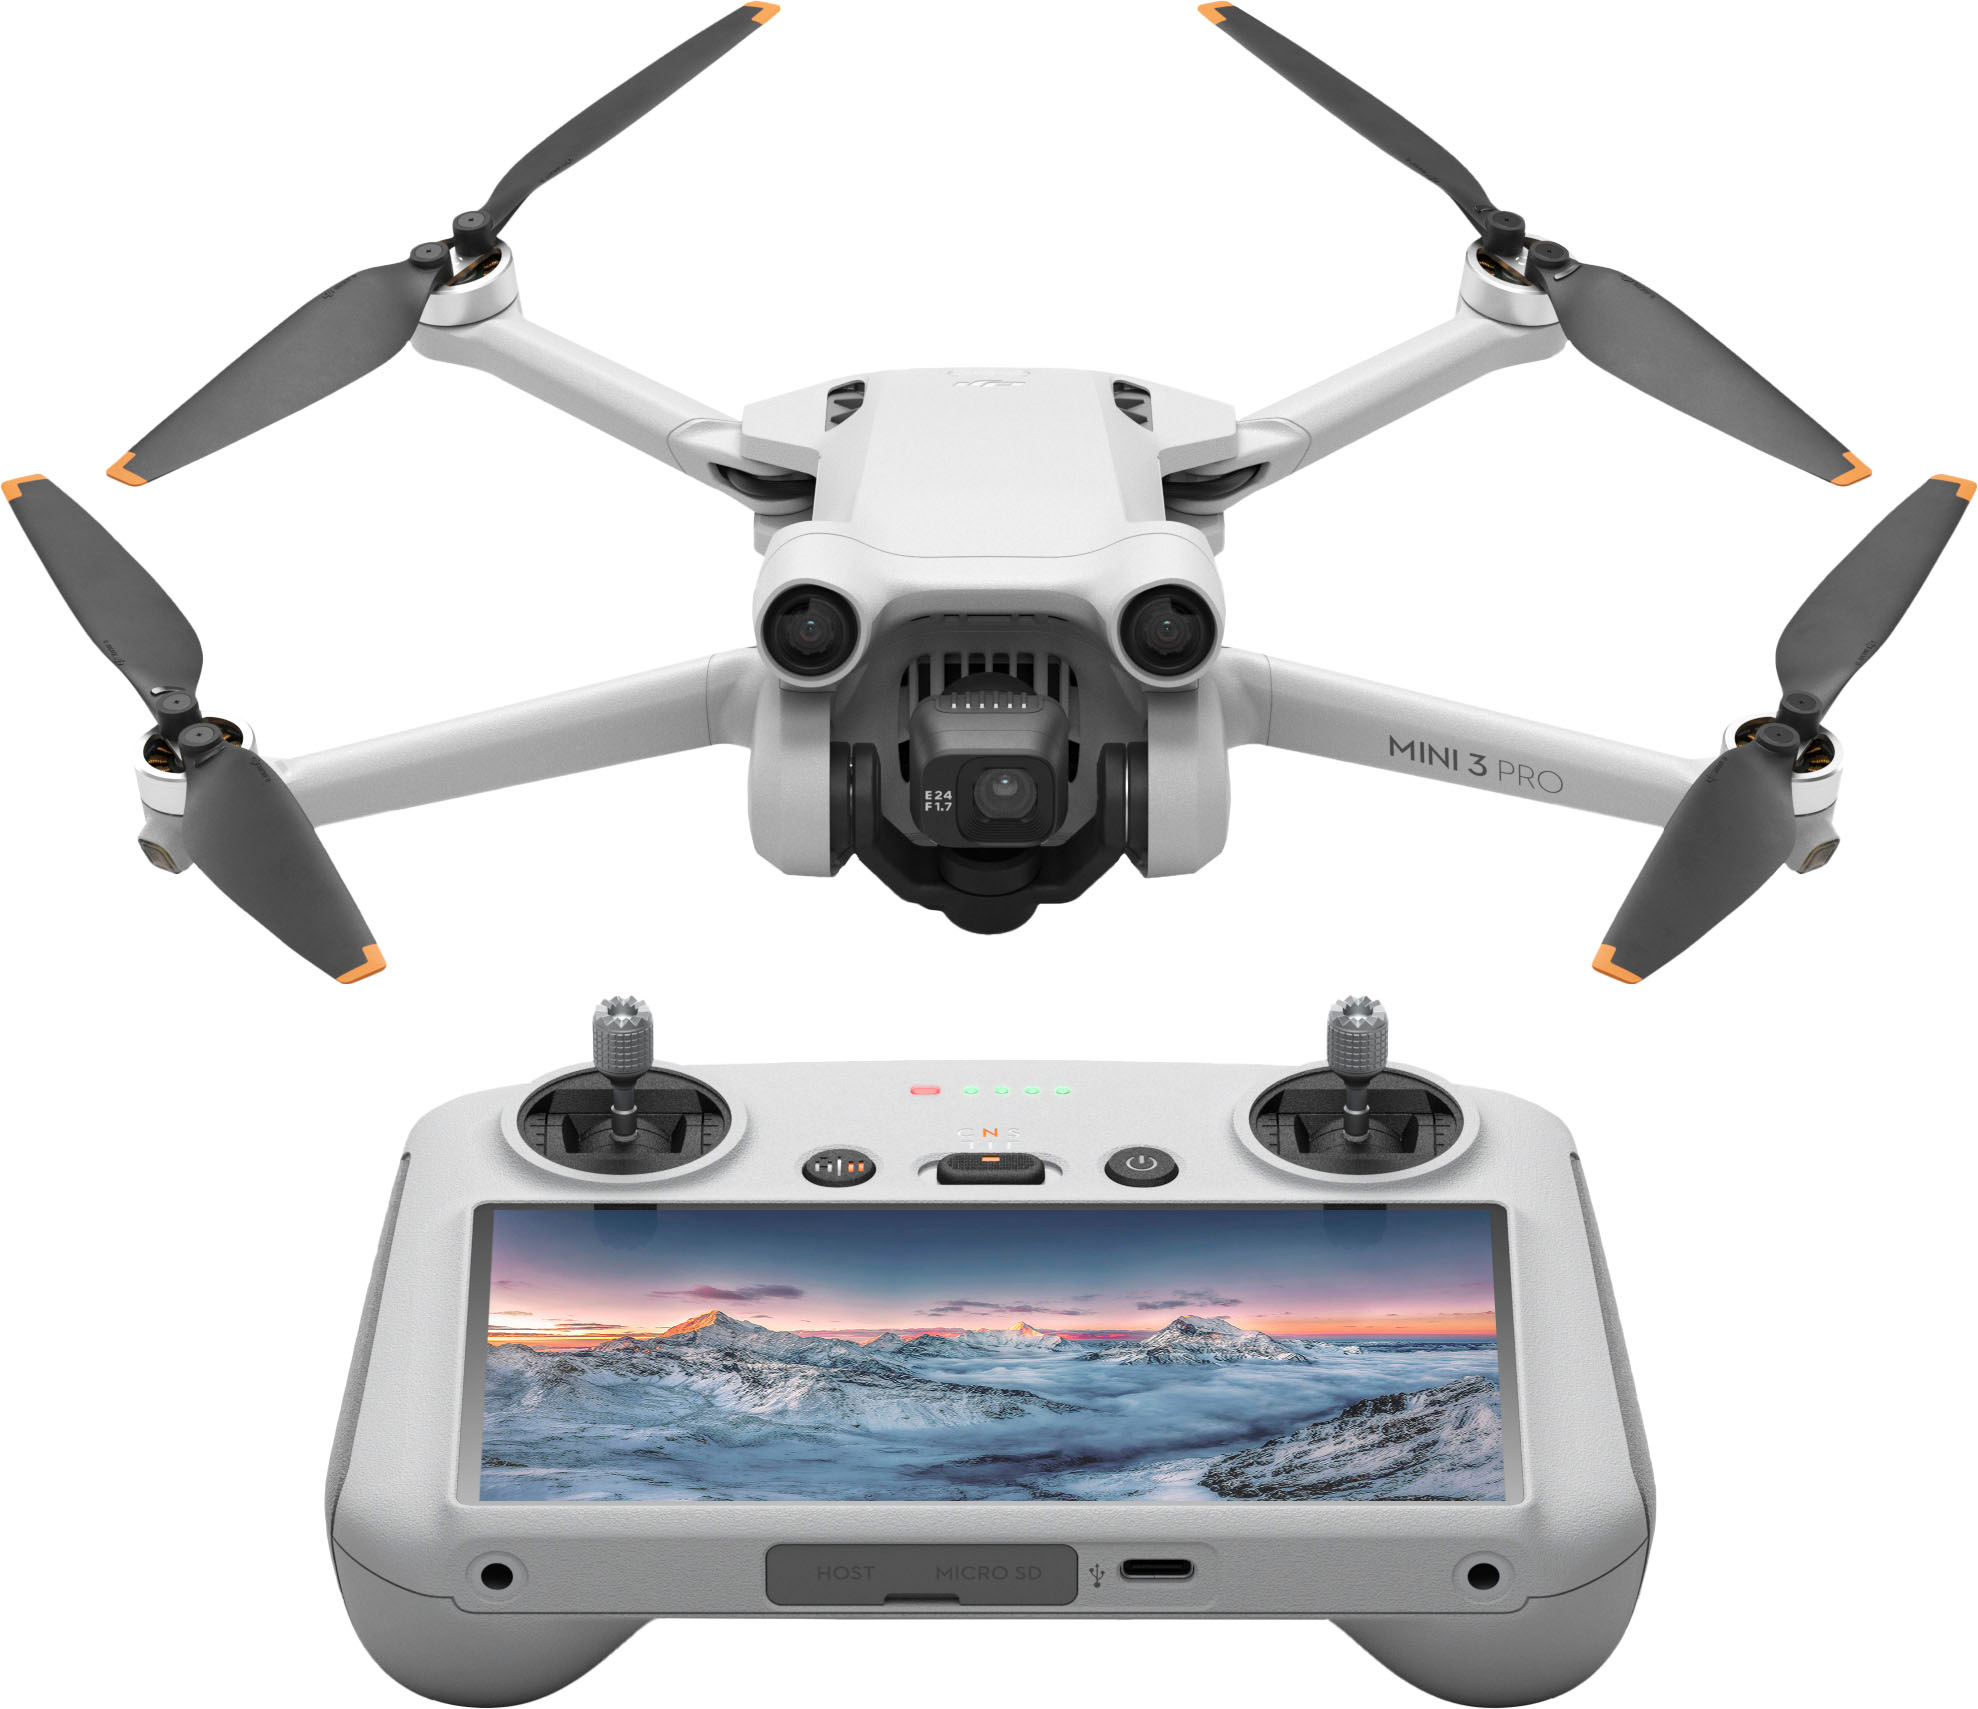 DJI - Mini 3 Pro and Remote Control with Built-in Screen - Gray